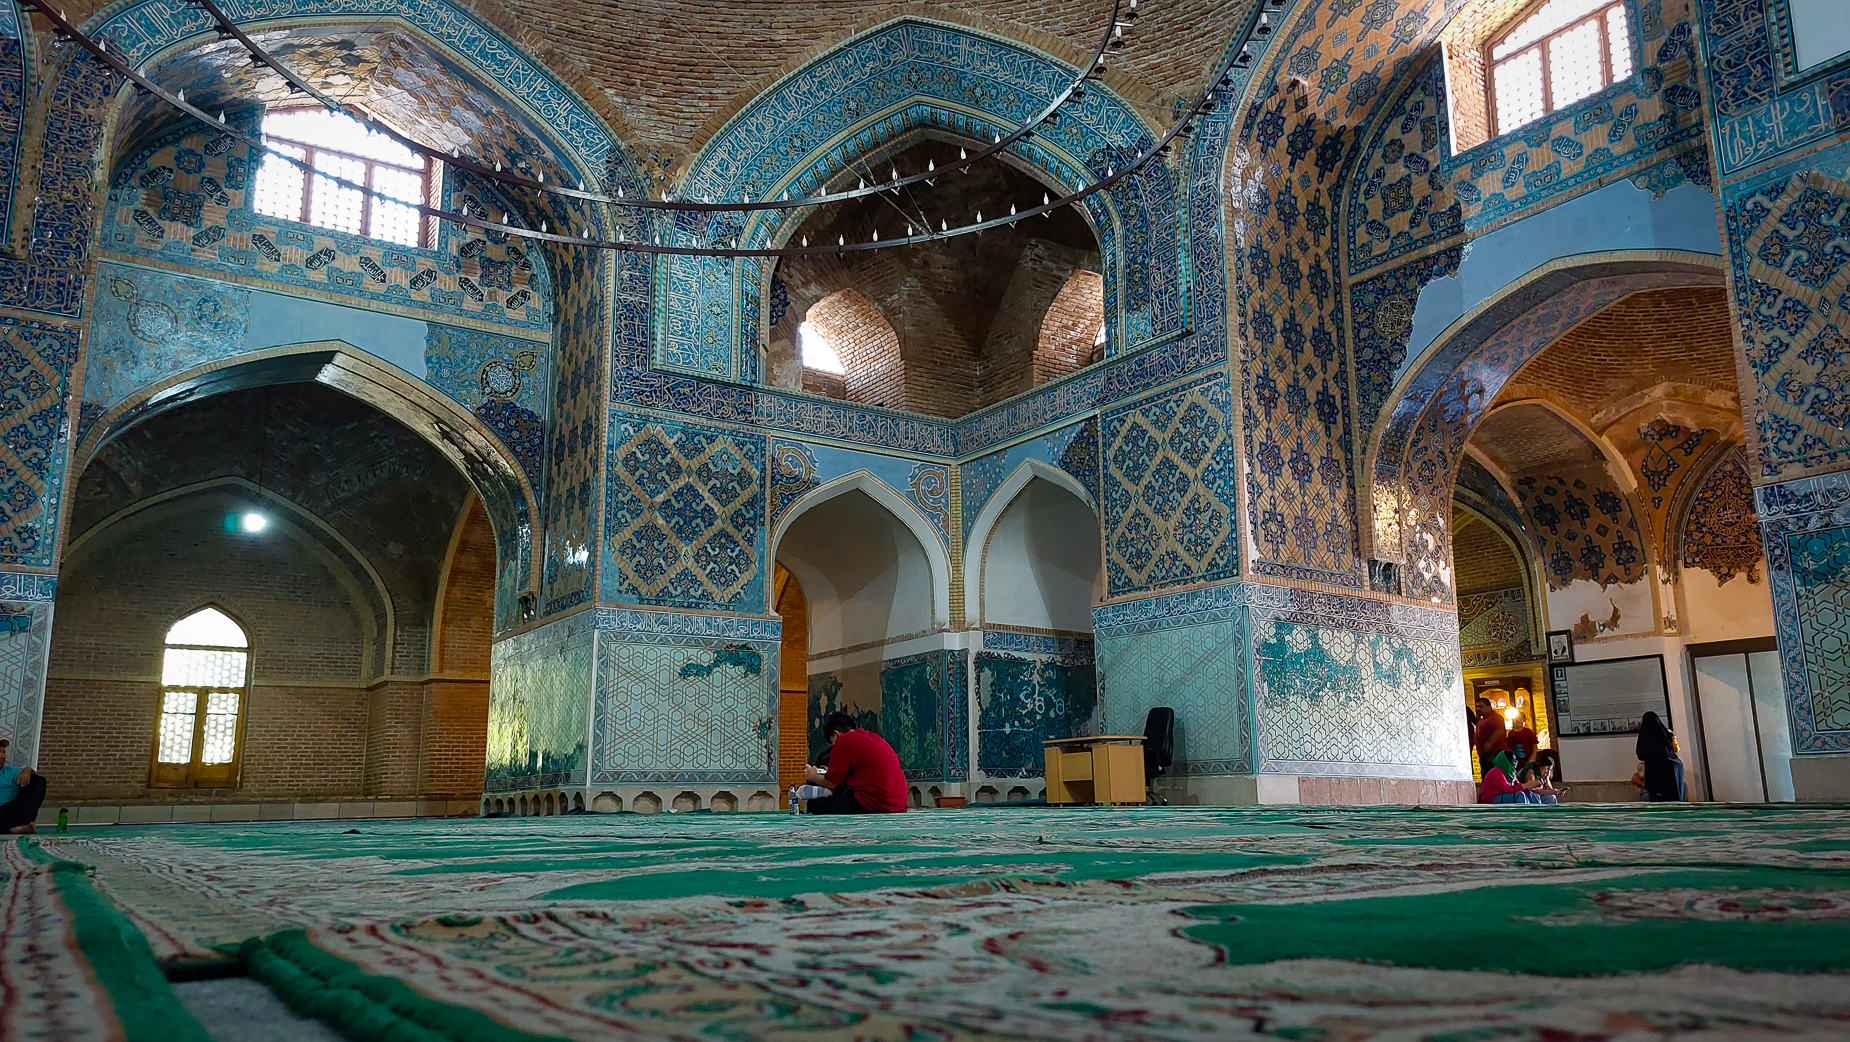 <span  class="uc_style_uc_tiles_grid_image_elementor_uc_items_attribute_title" style="color:#ffffff;">The 'Blue Mosque' in Tabriz</span>